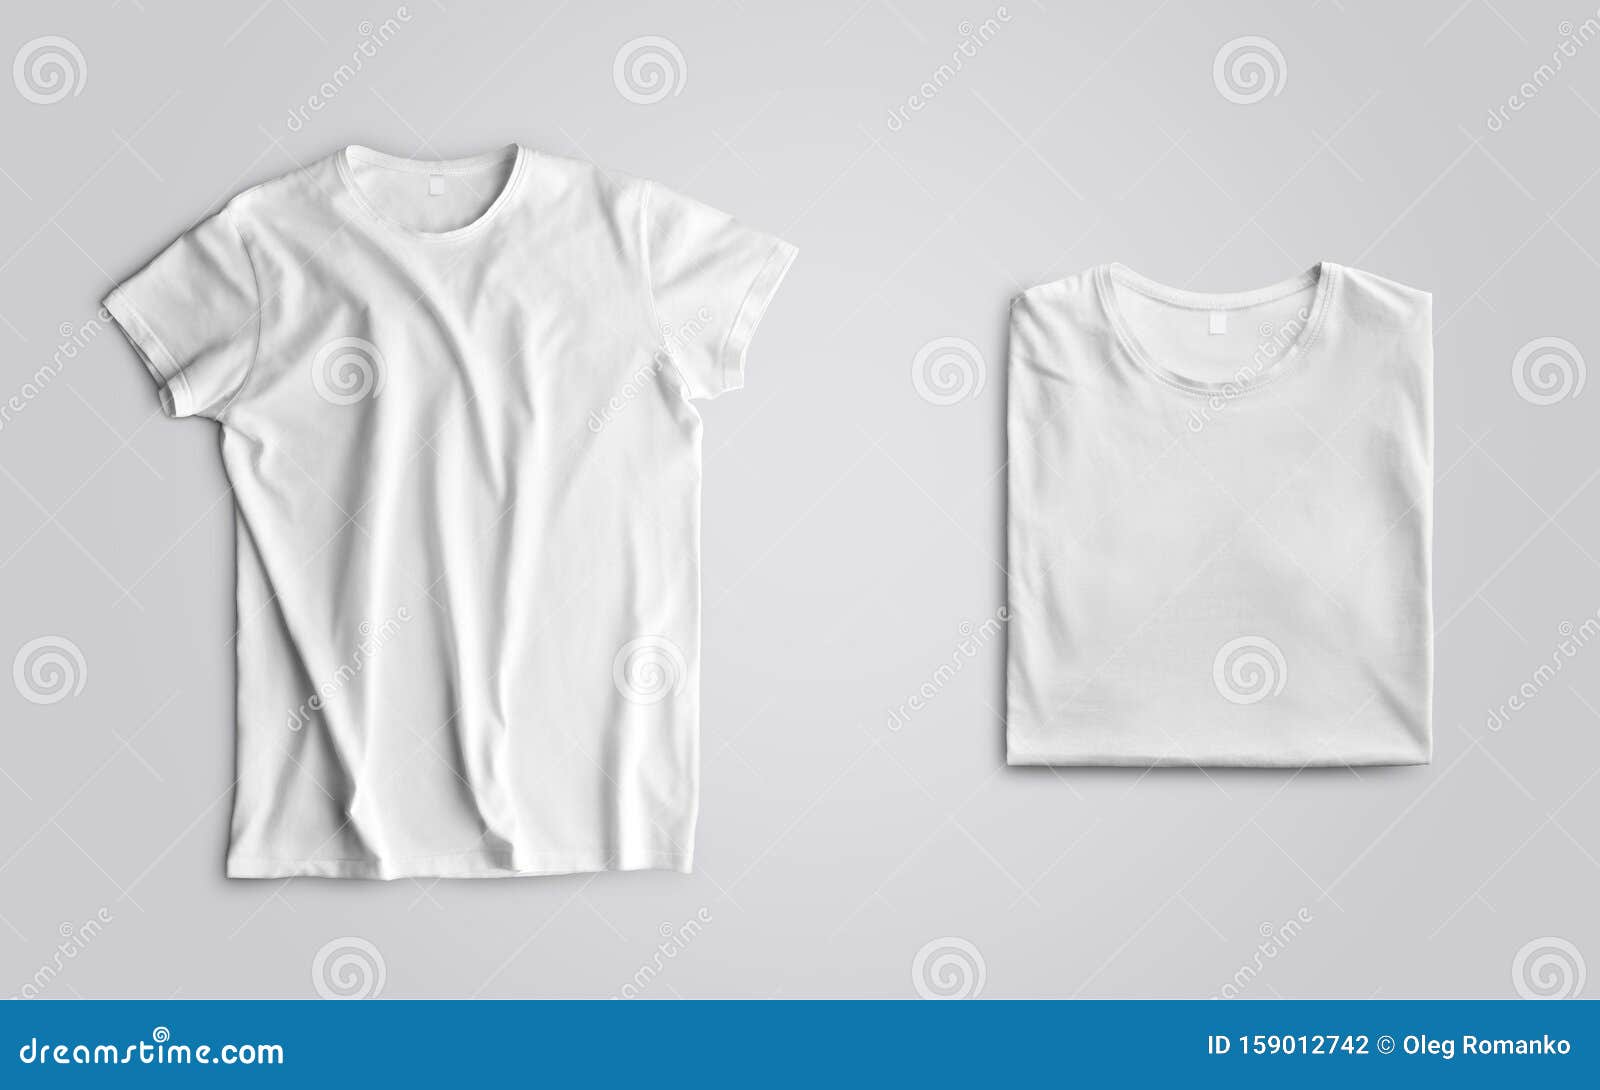 Download Unfolded And Folded Blank T-shirt On A Studio Background ...